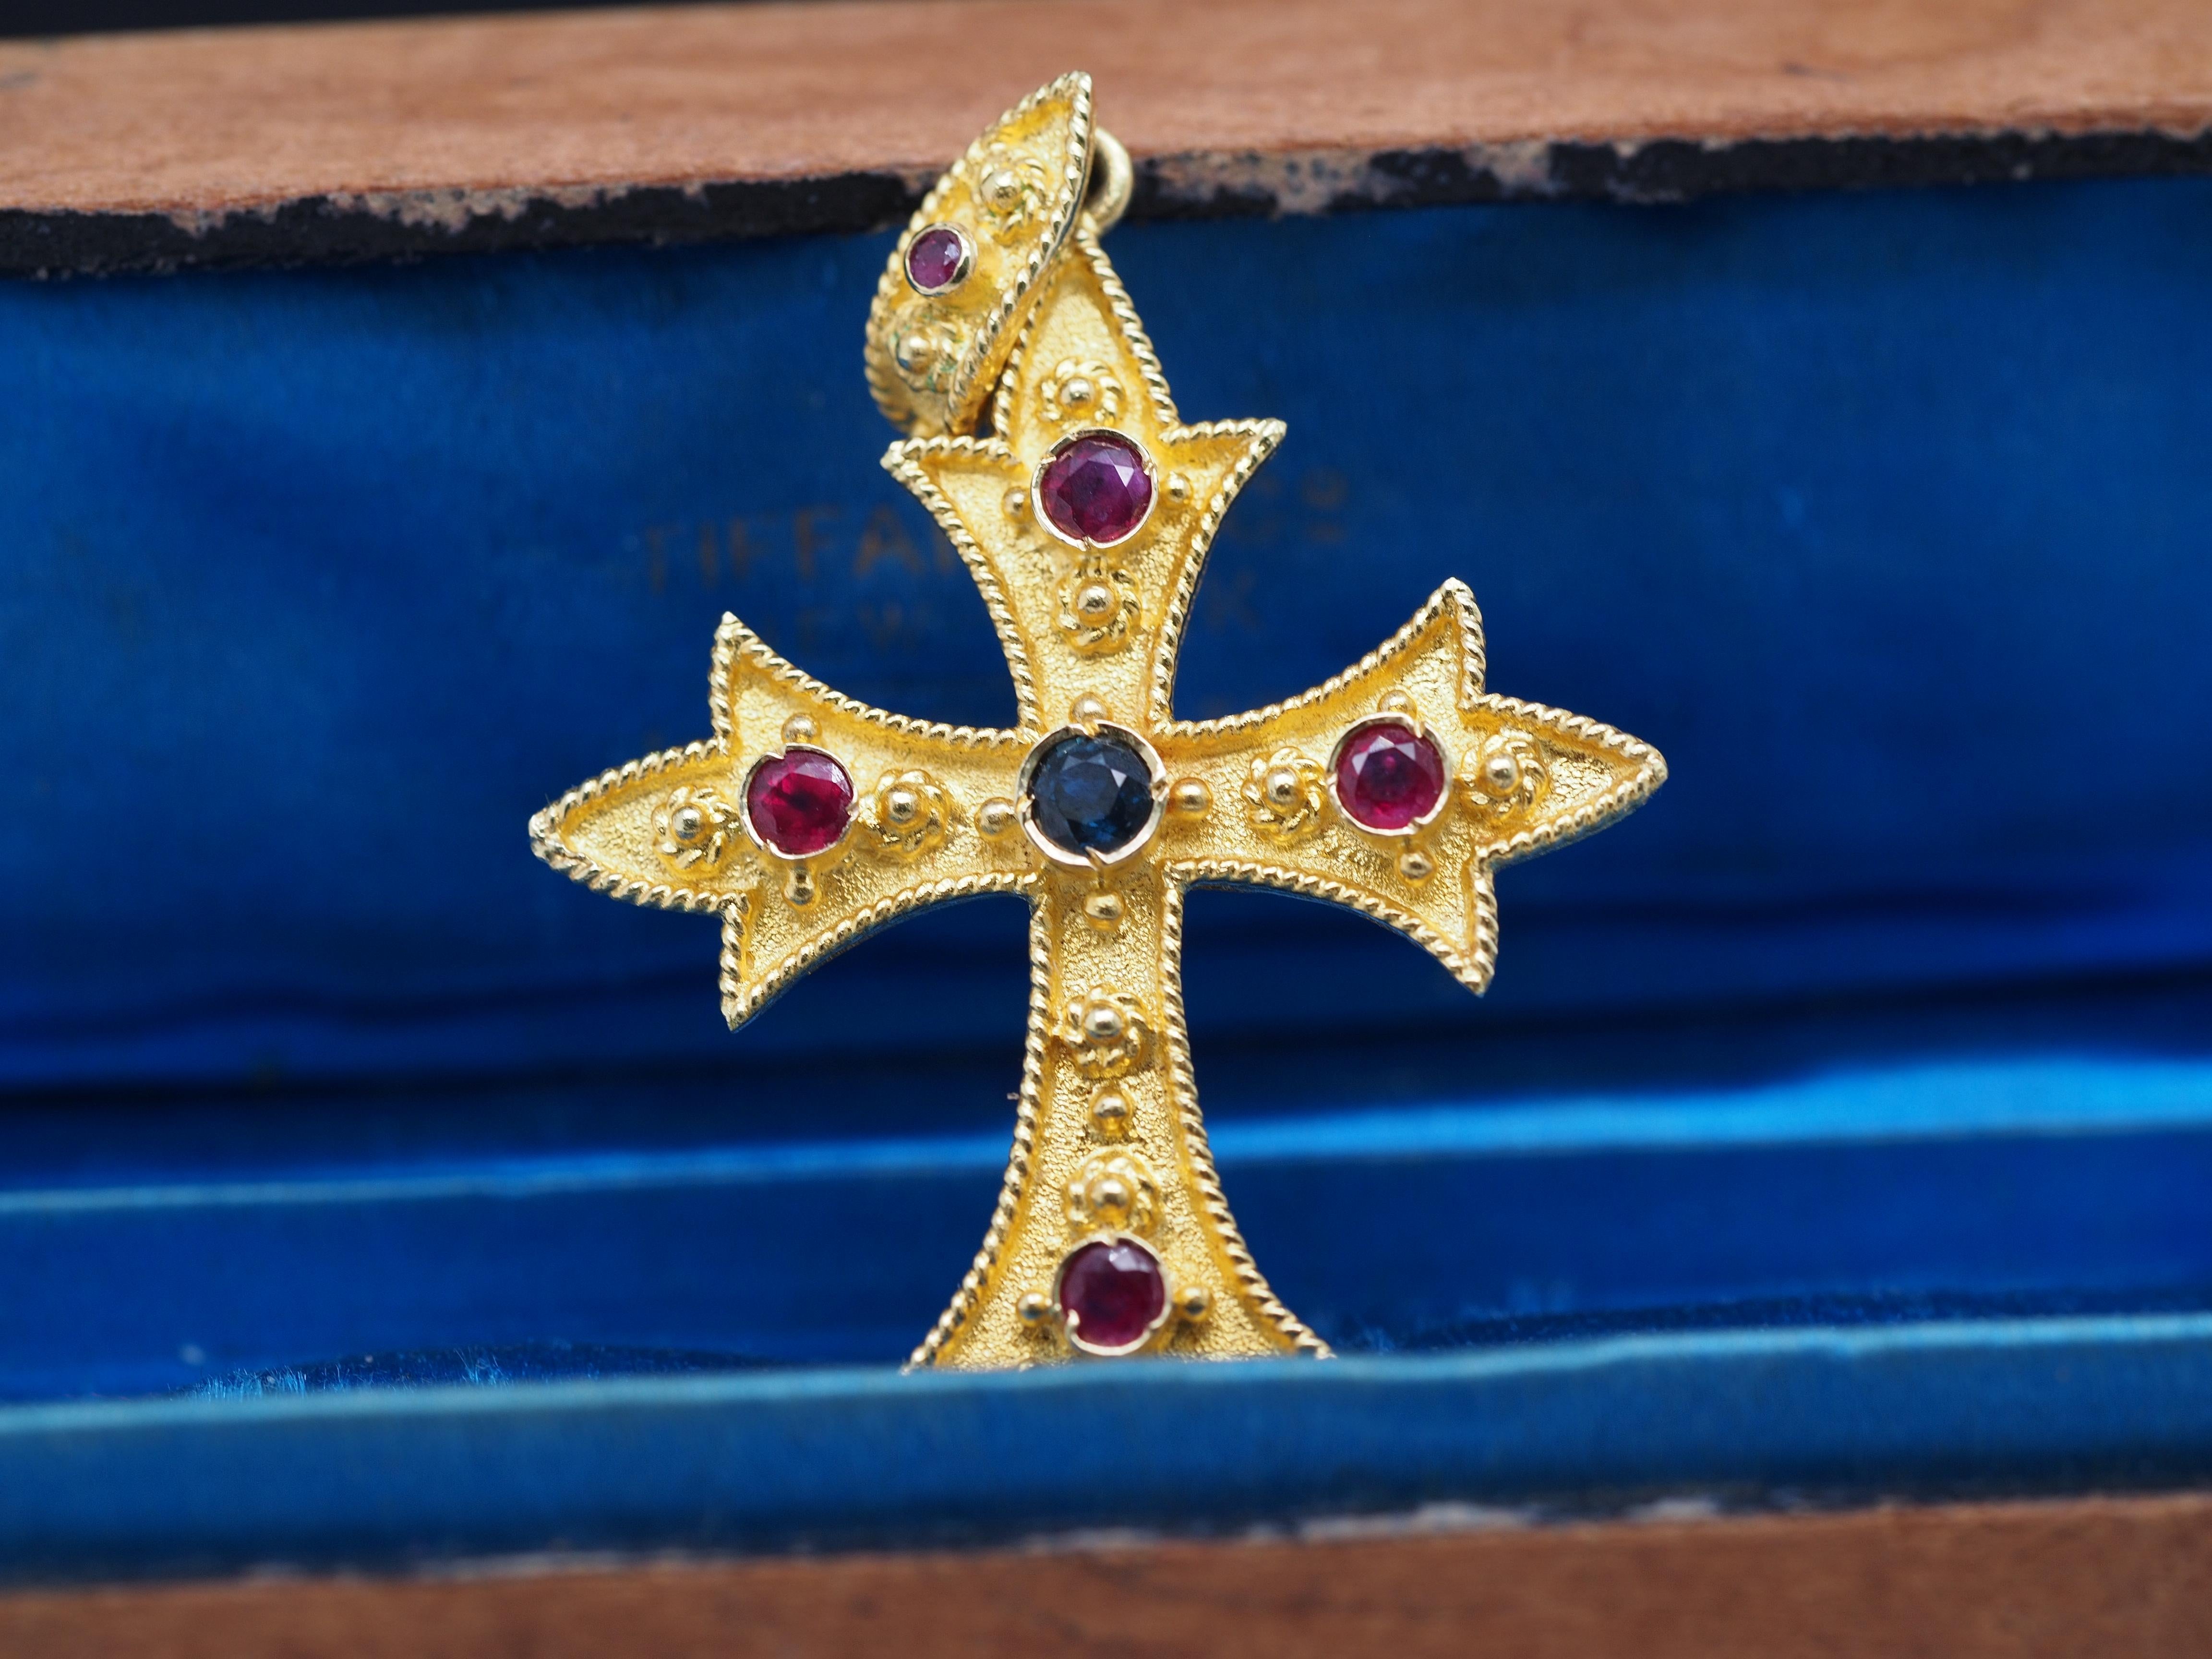 Metal Type: 18K Yellow Gold [Hallmarked, and Tested]
Weight: 9.5 grams
Ruby and Sapphire Details:
Weight: 1.00ct, total weight
Cut: Old European brilliant
Color: Blue and Red
Pendant Measurement: 2inch x 1.25 inch
Condition: Excellent